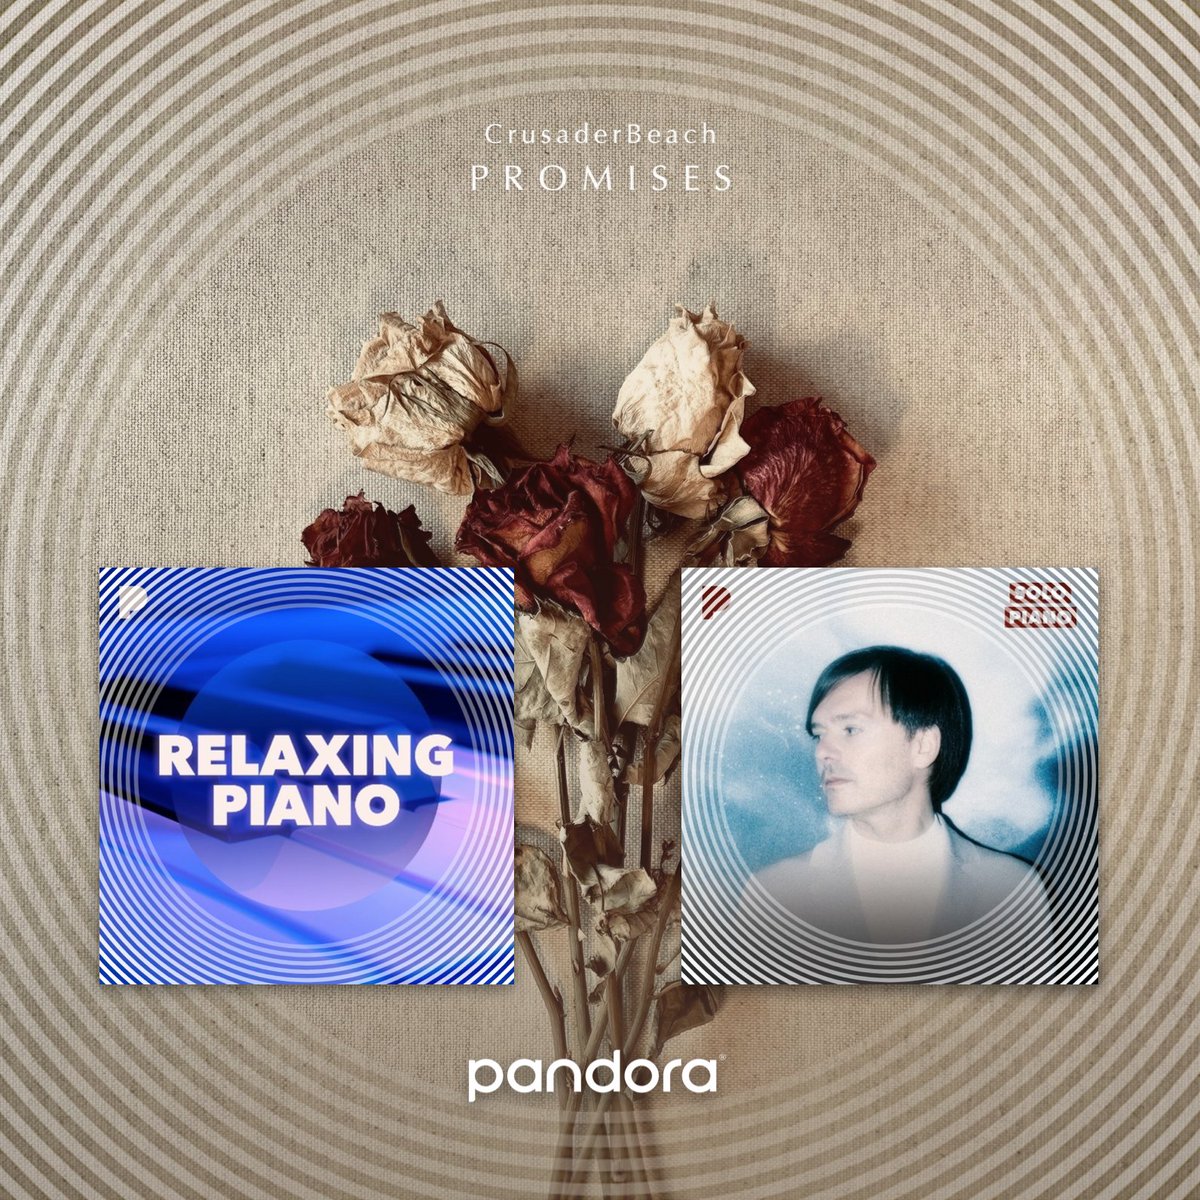 Immensely grateful to the awesome team at Pandora Music for adding Promises to their Relaxing Piano station plus the mega Solo Piano station with 4.7M listeners! 🎧 pandora.app.link/BESqC975fIb pandora.app.link/wTyb8k65fIb @pandoraAMP @pandoramusic #relaxingpiano #solopiano #pandoramusic